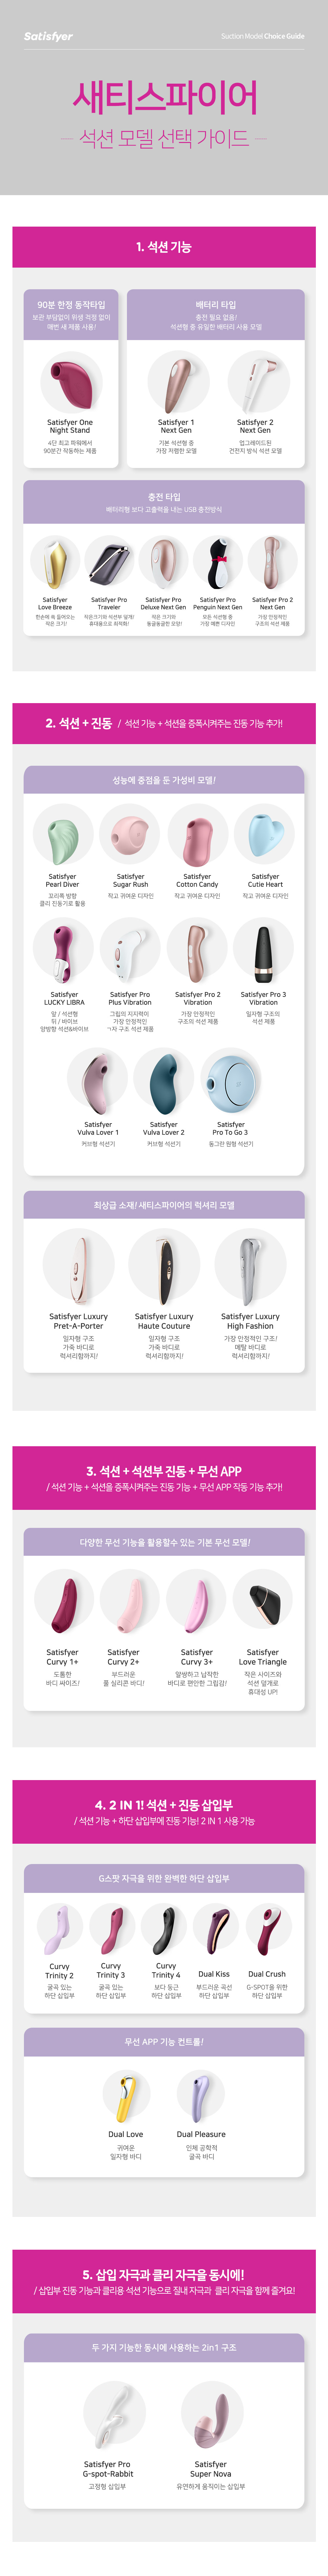 SATISFYER PRO TO GO 3 (3 COLOR)